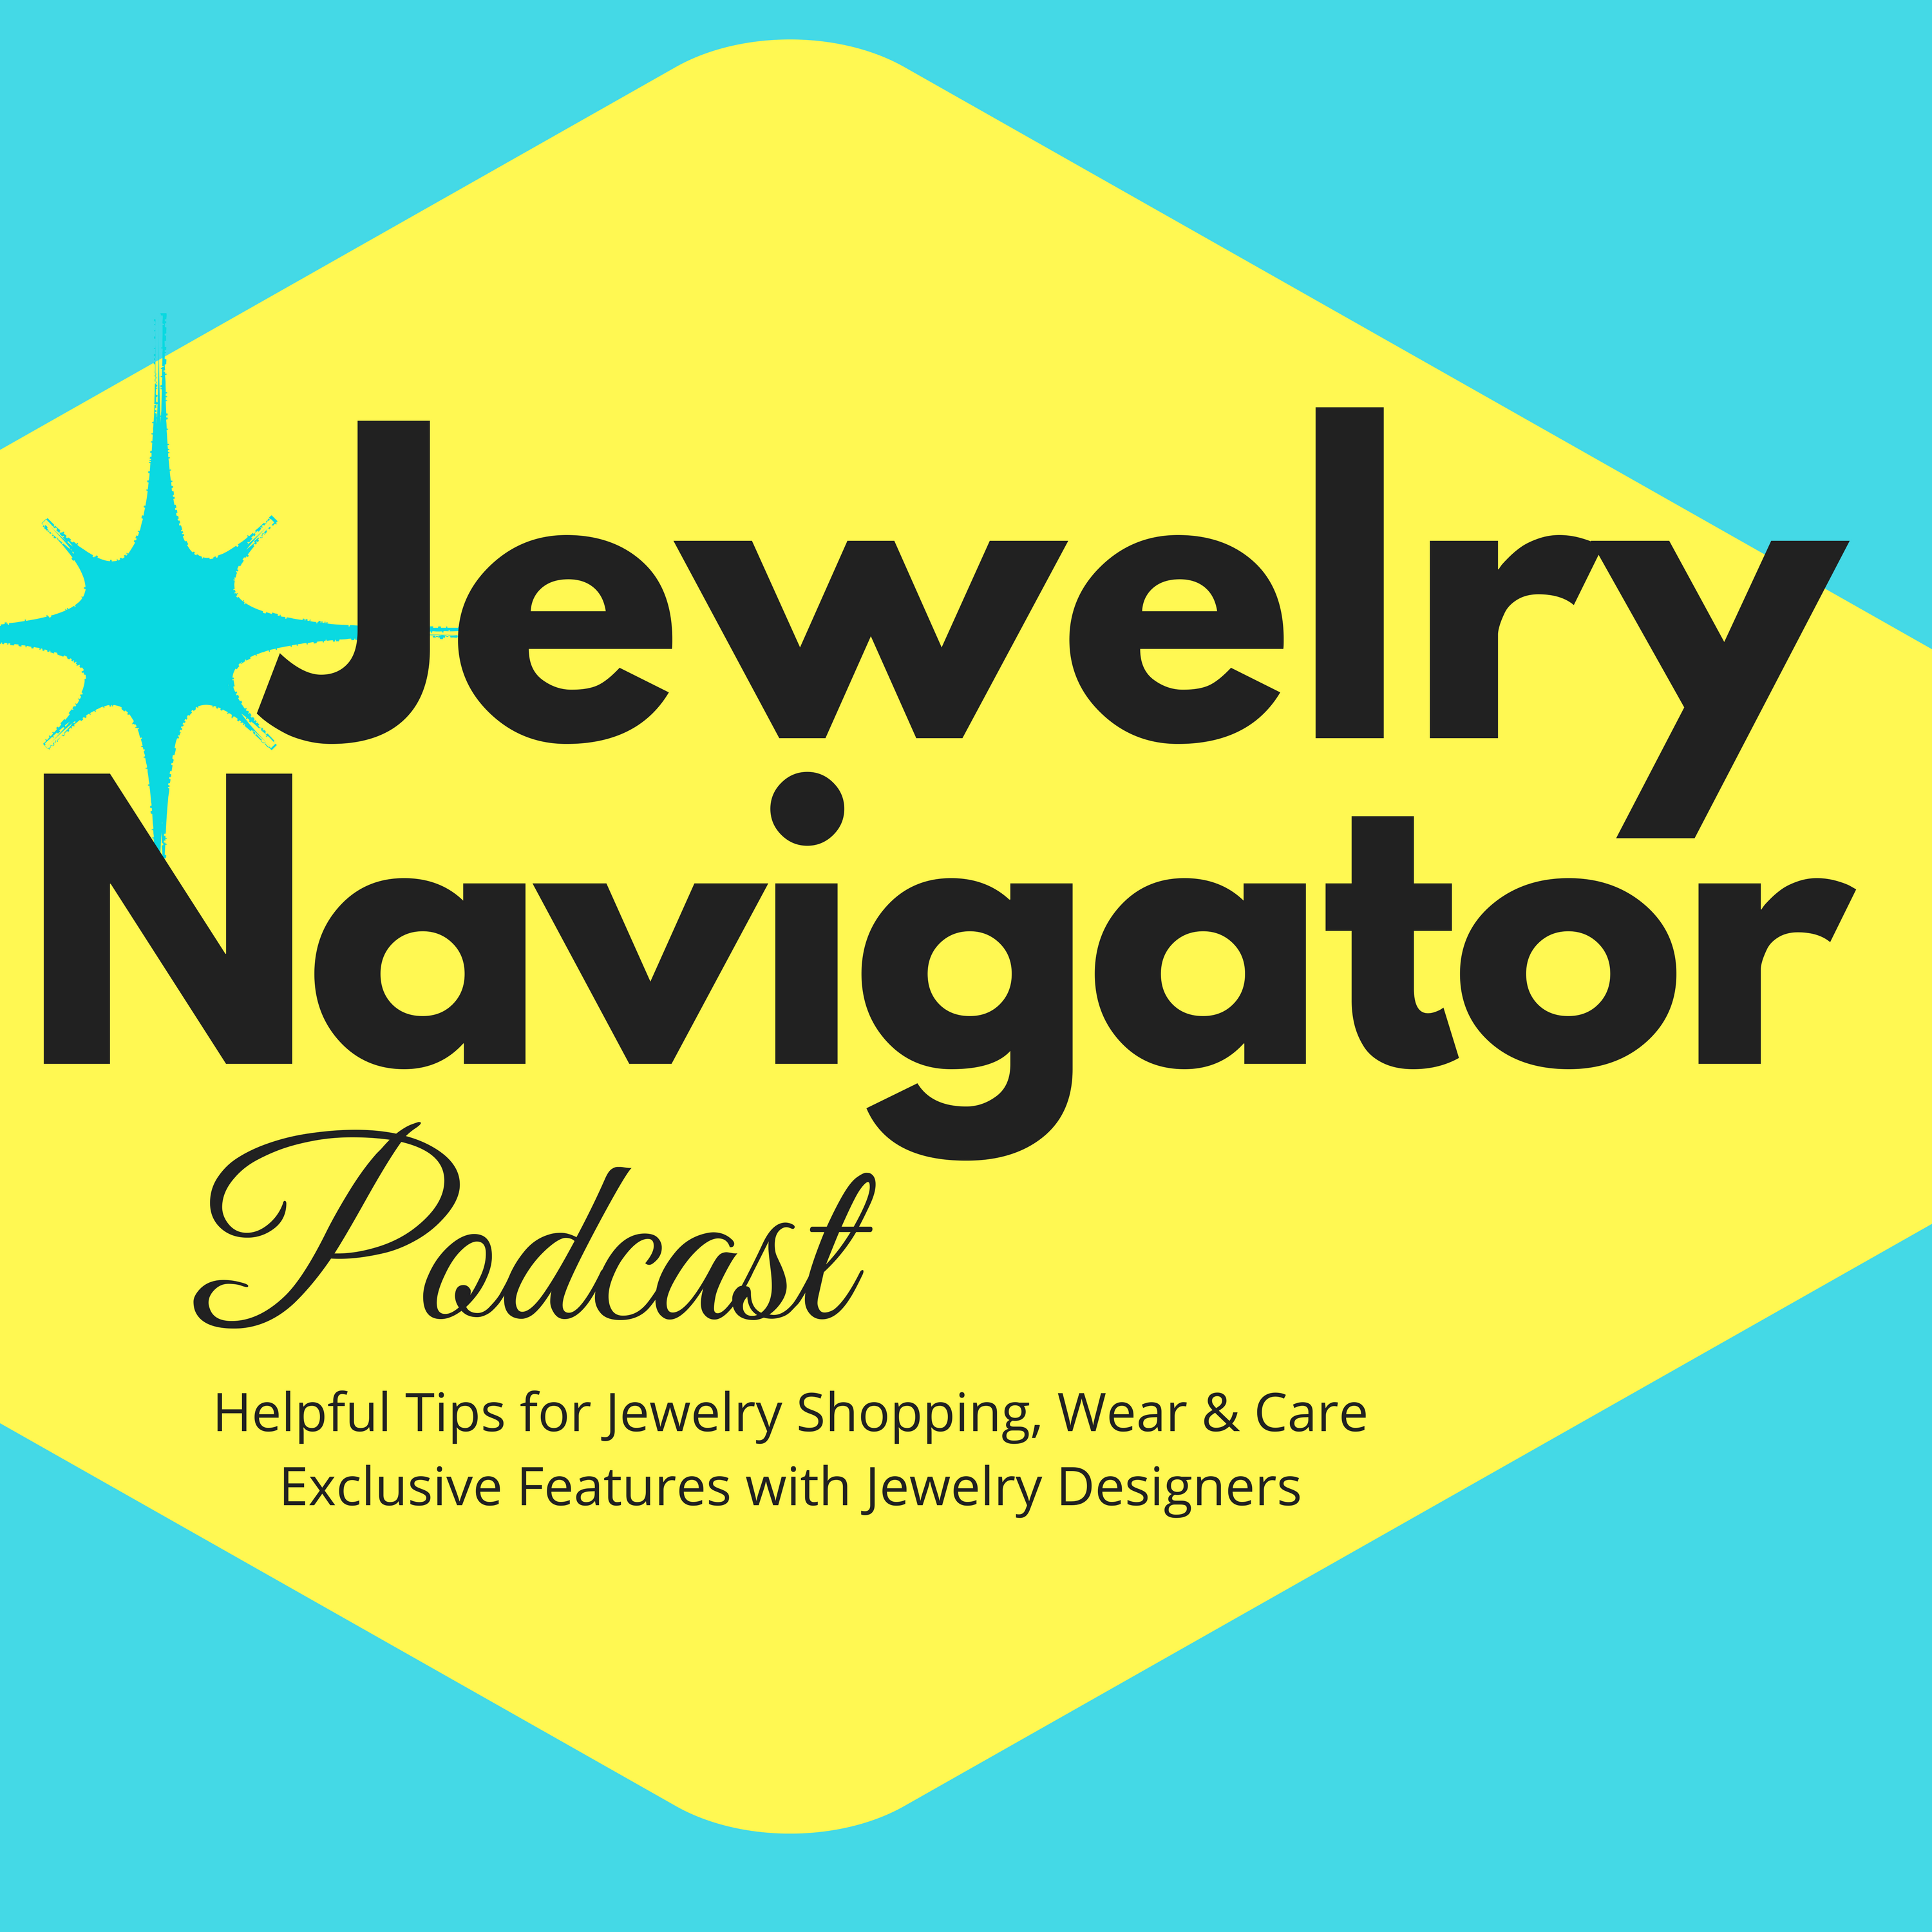 Welcome Aboard the Jewelry Navigator Podcast